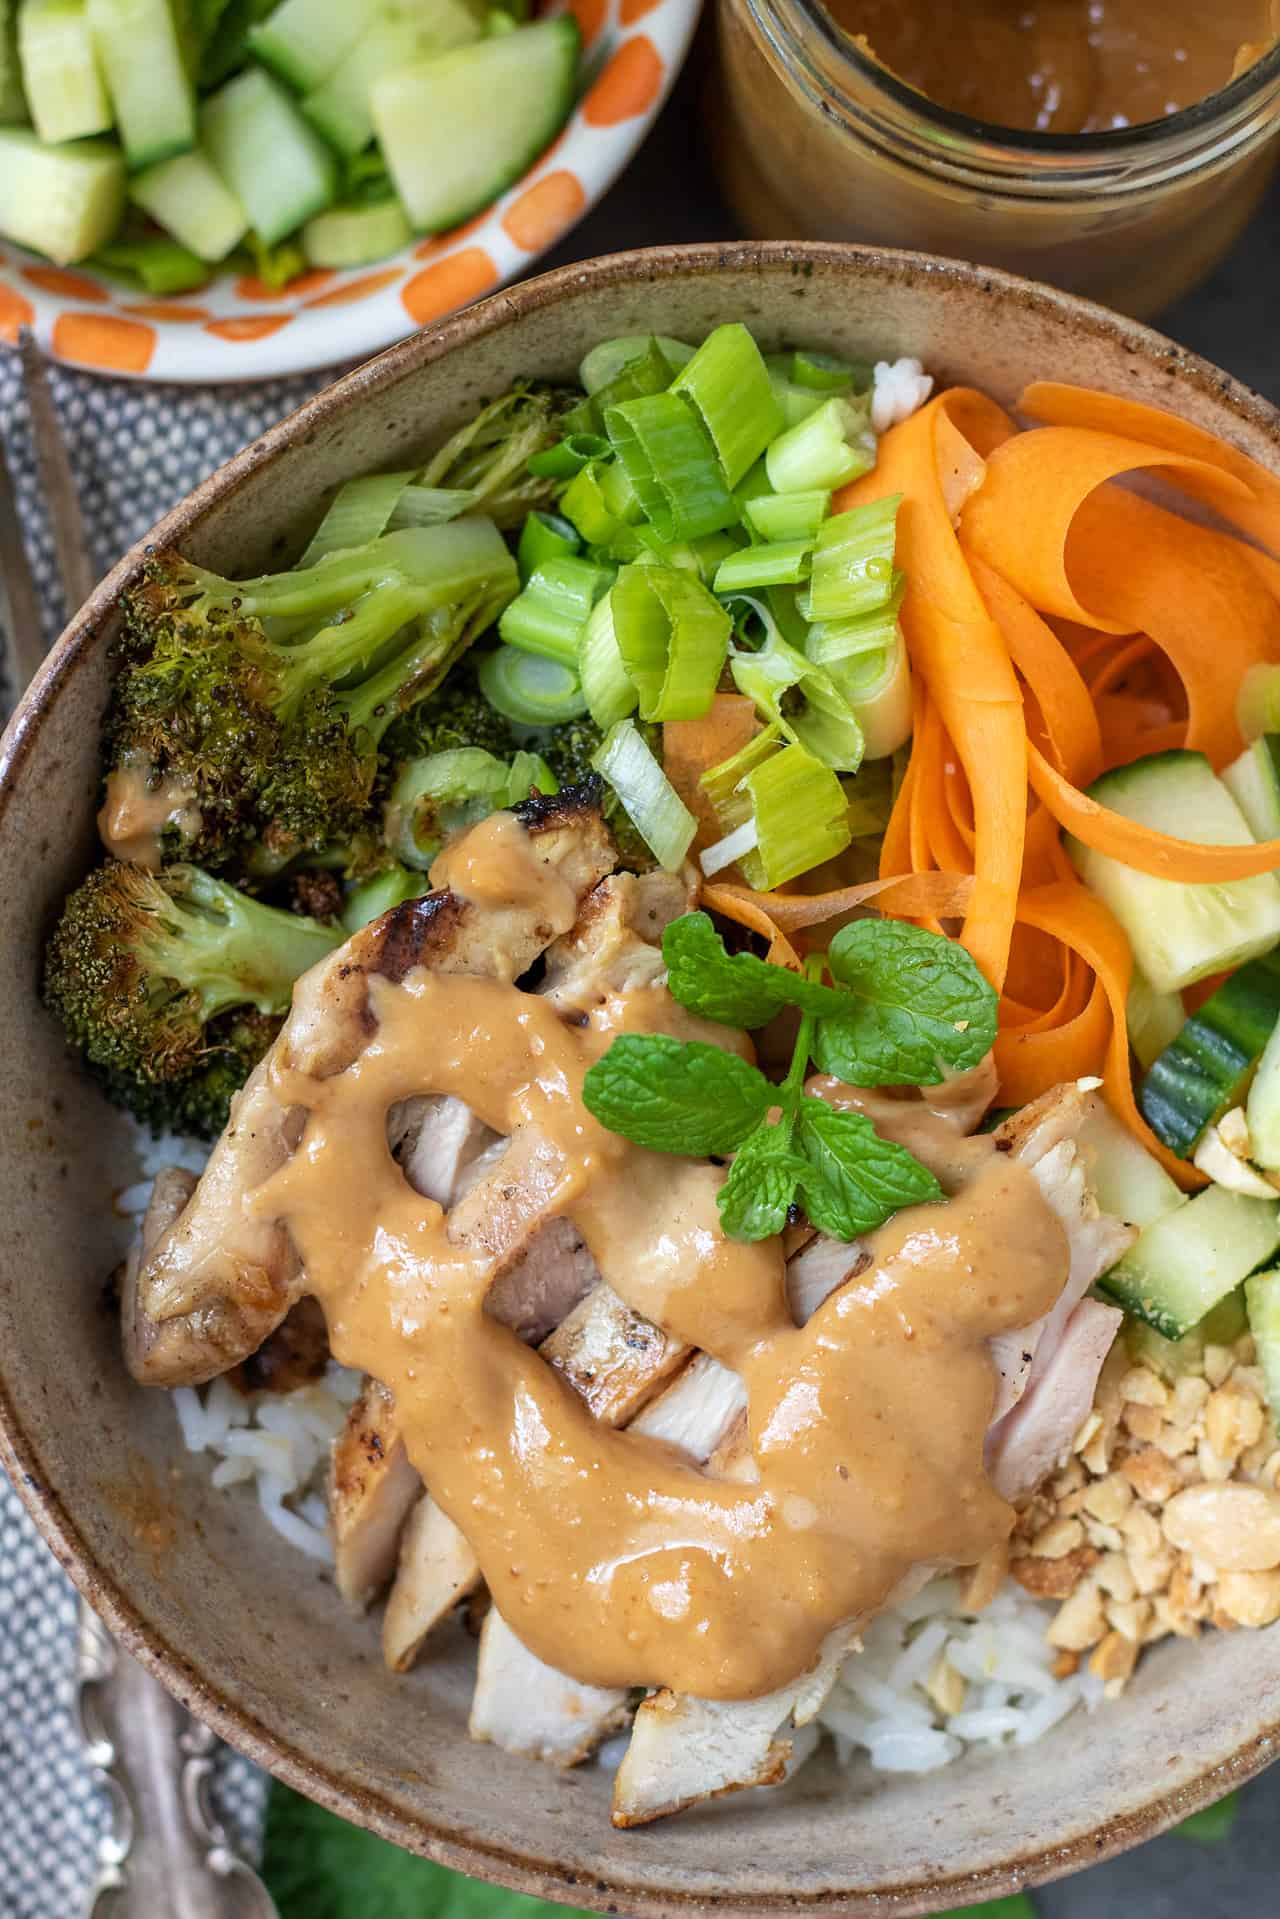 A close up of a Thai chicken rice bowl. There's a peanut sauce drizzled on top. The bowl has ribboned carrots, diced cucumbers, scallions and broccoli. There's a sprig of fresh mint on top of the rice bowl.